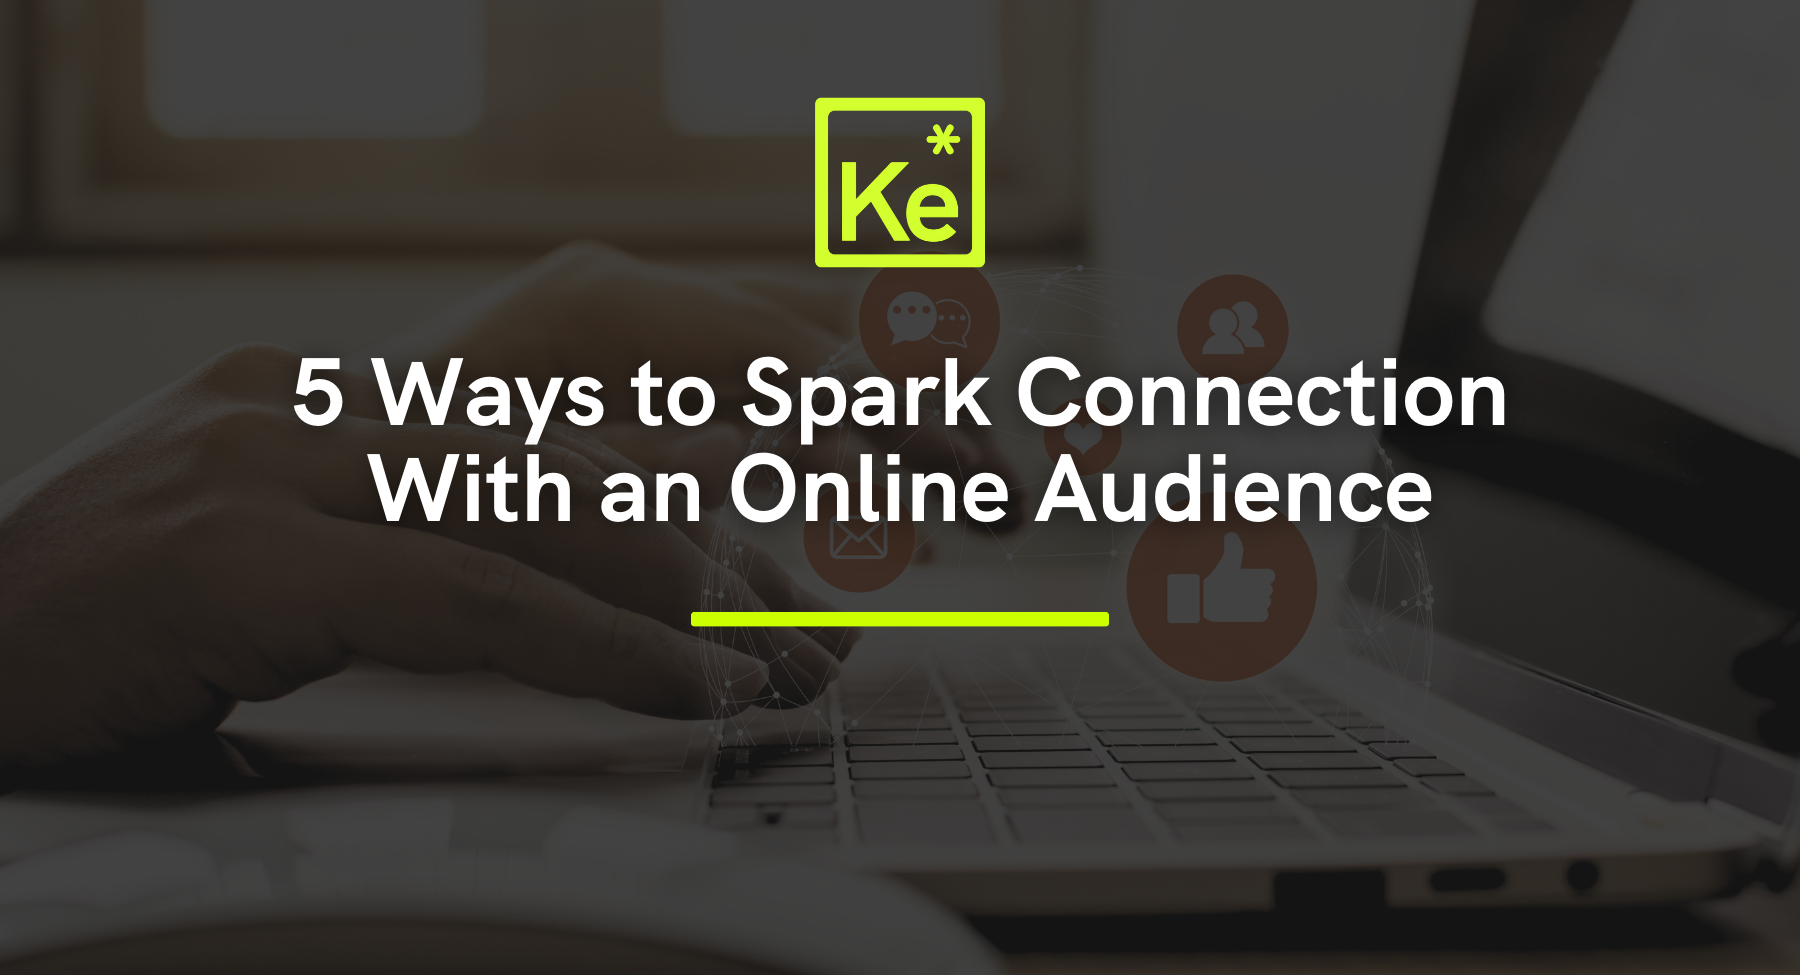 Spark connection with an online audience